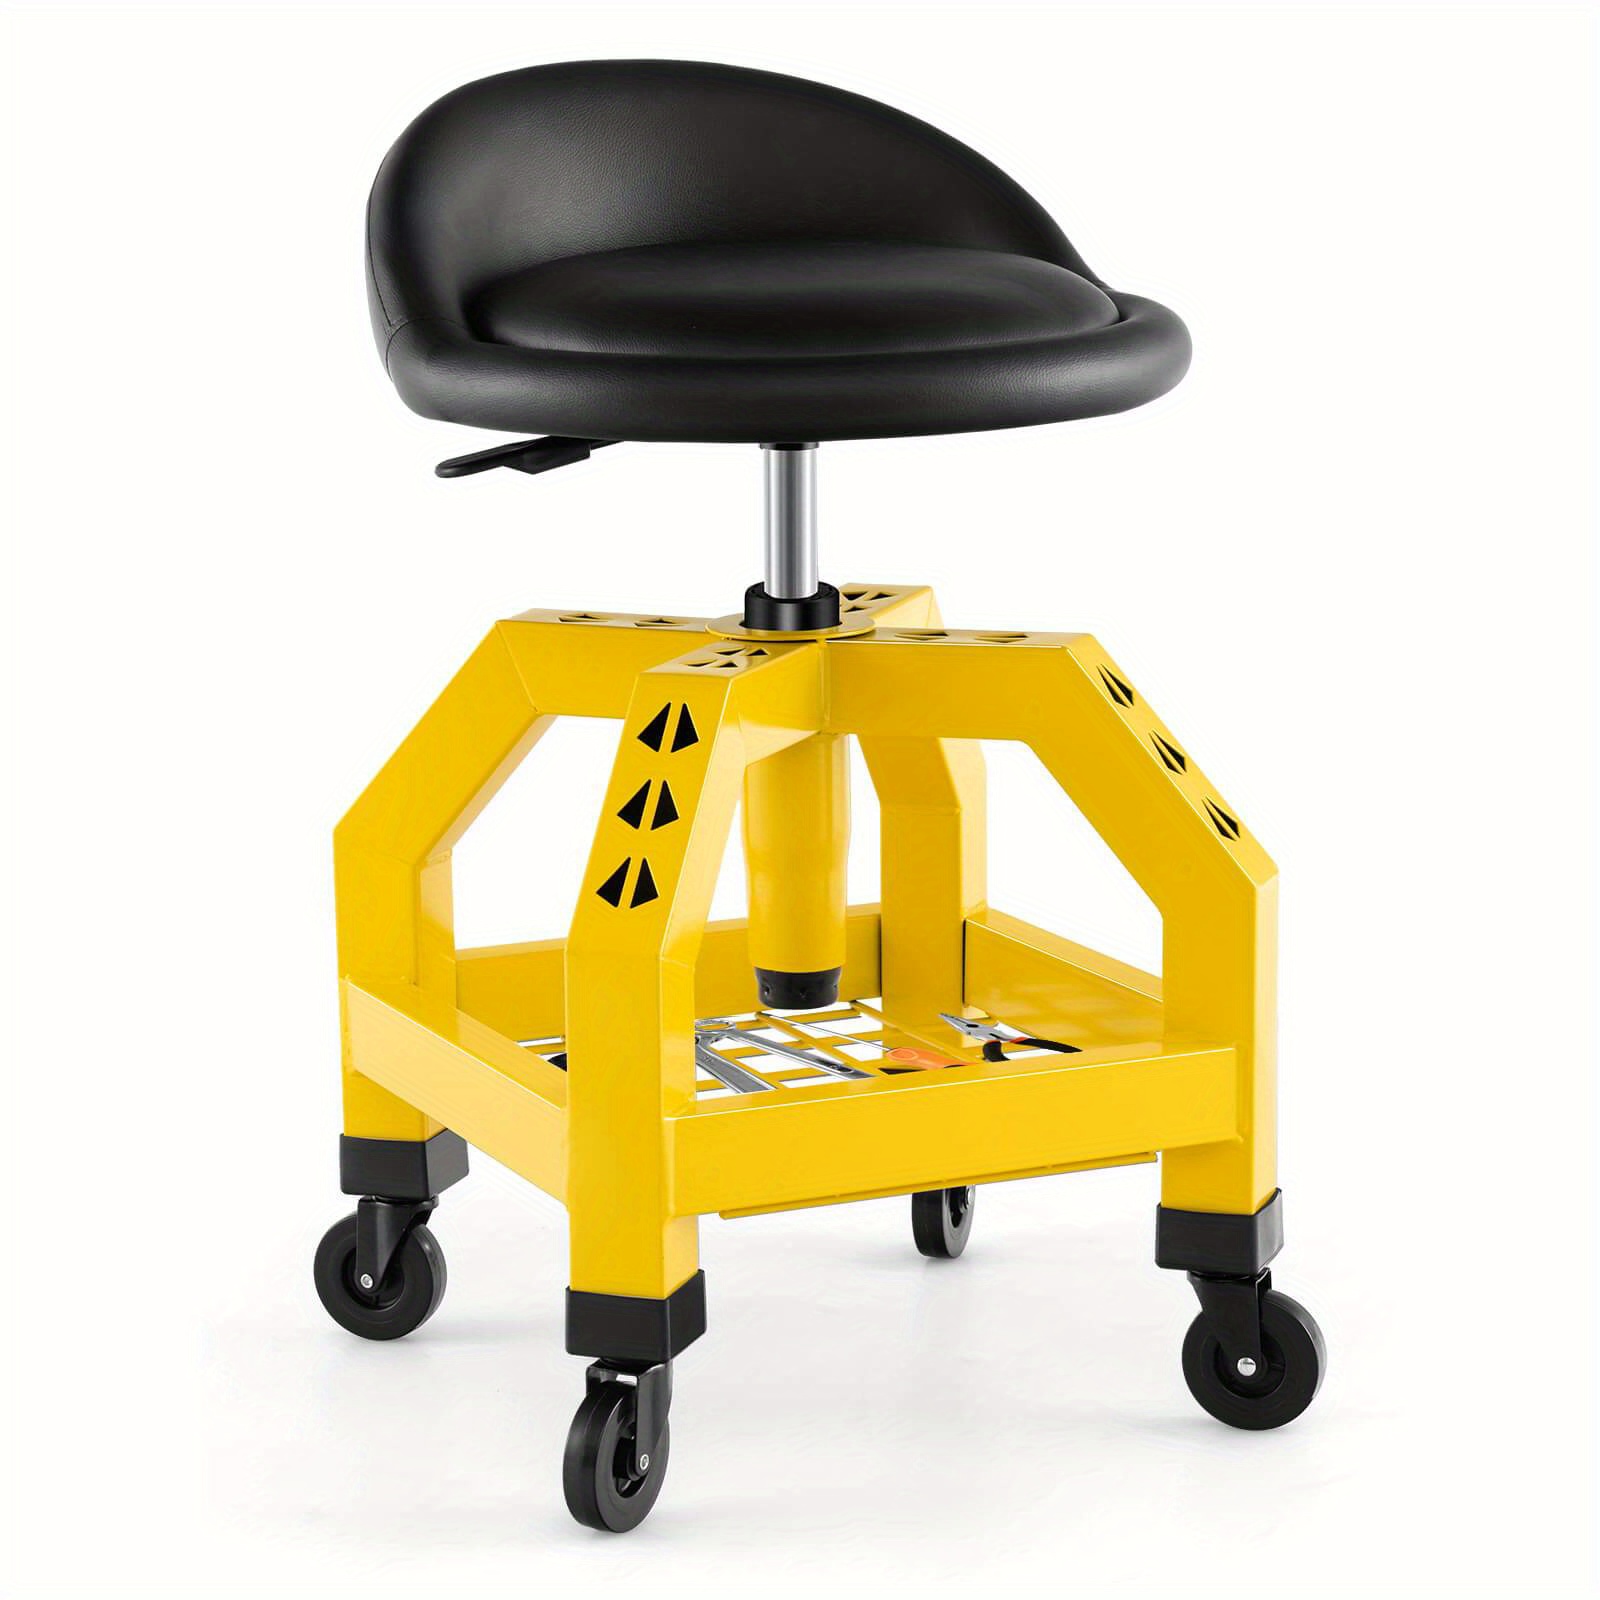 

Safstar Rolling Seat Mechanic Stool Chair With Tool Tray 4 Universal Wheels For Factory